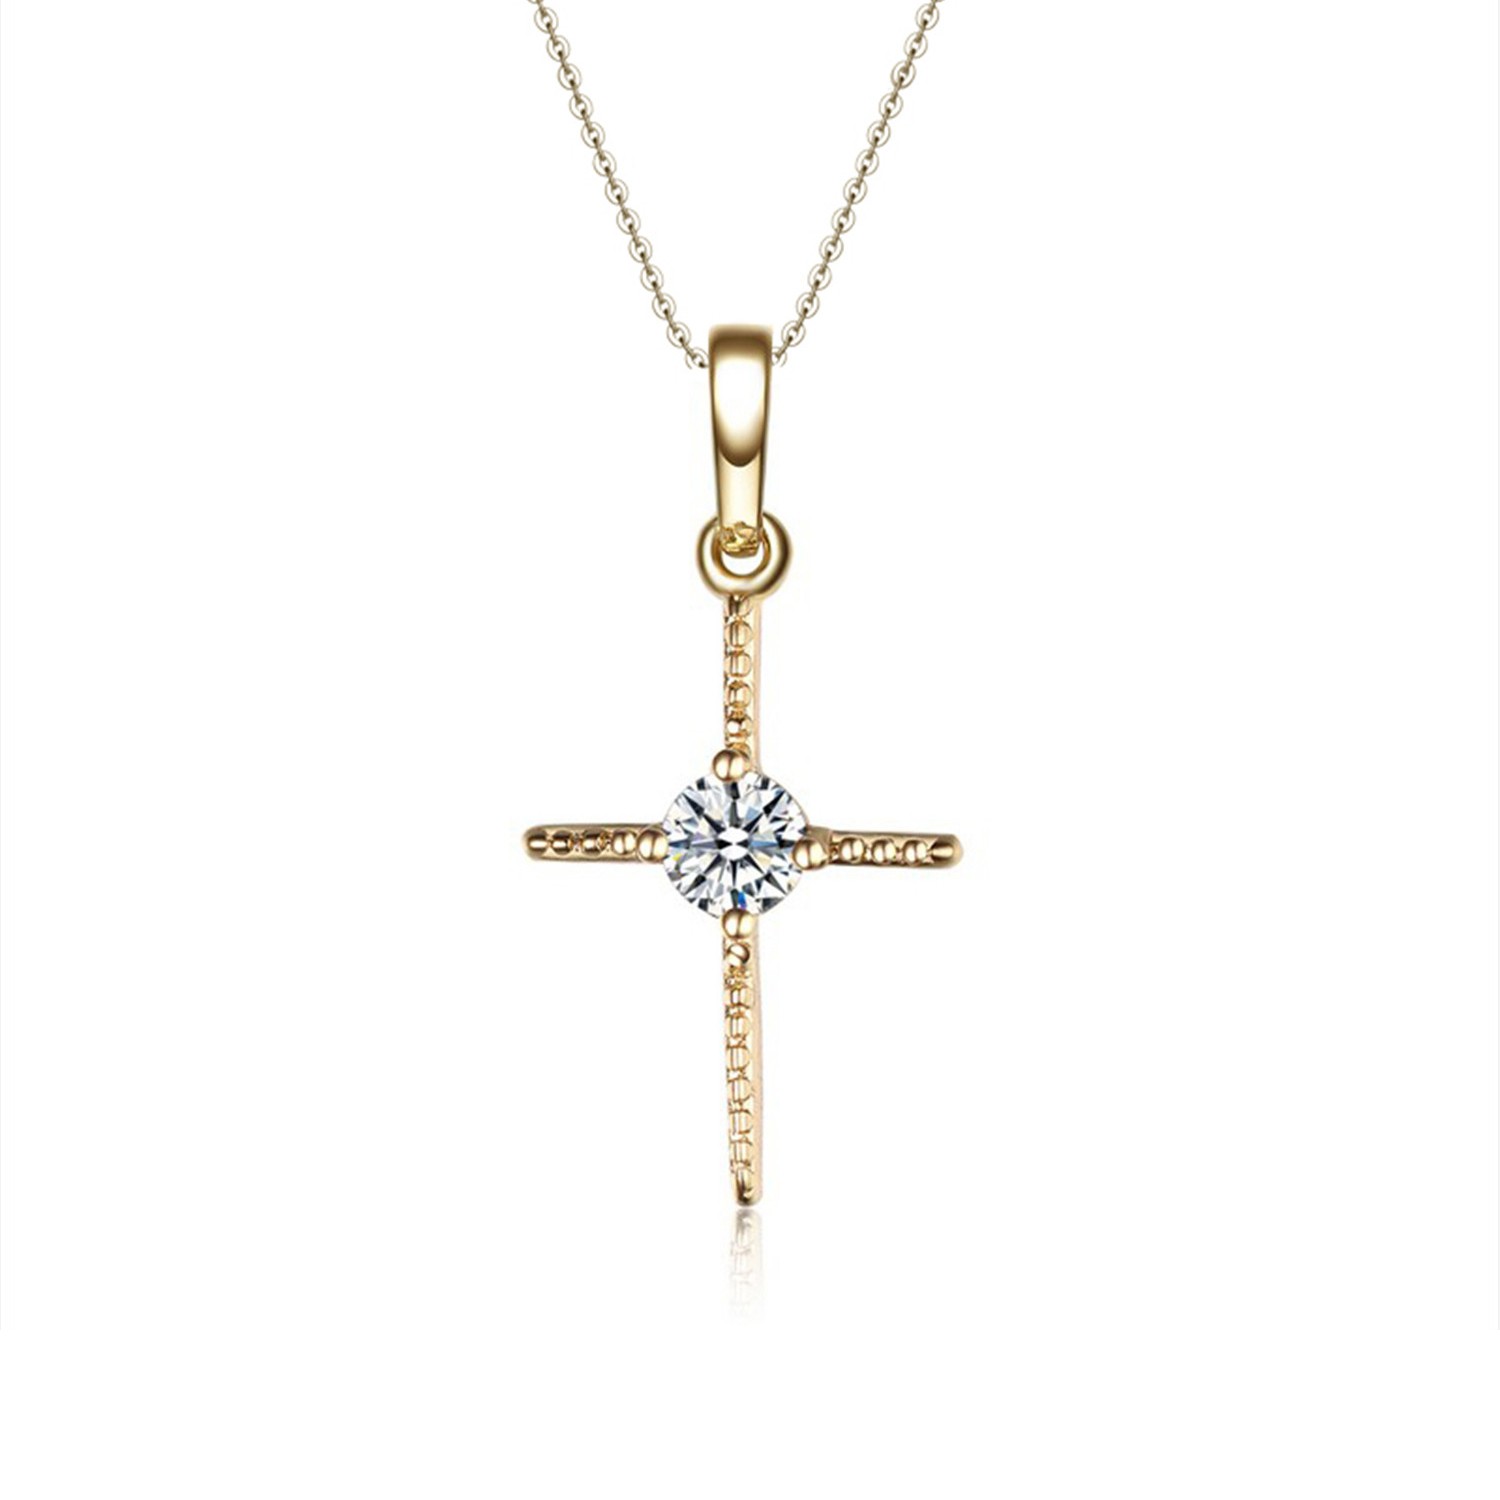 Luxurious 925 sterling silver gold plated pendant necklace women jewelry hot sale cross necklace 